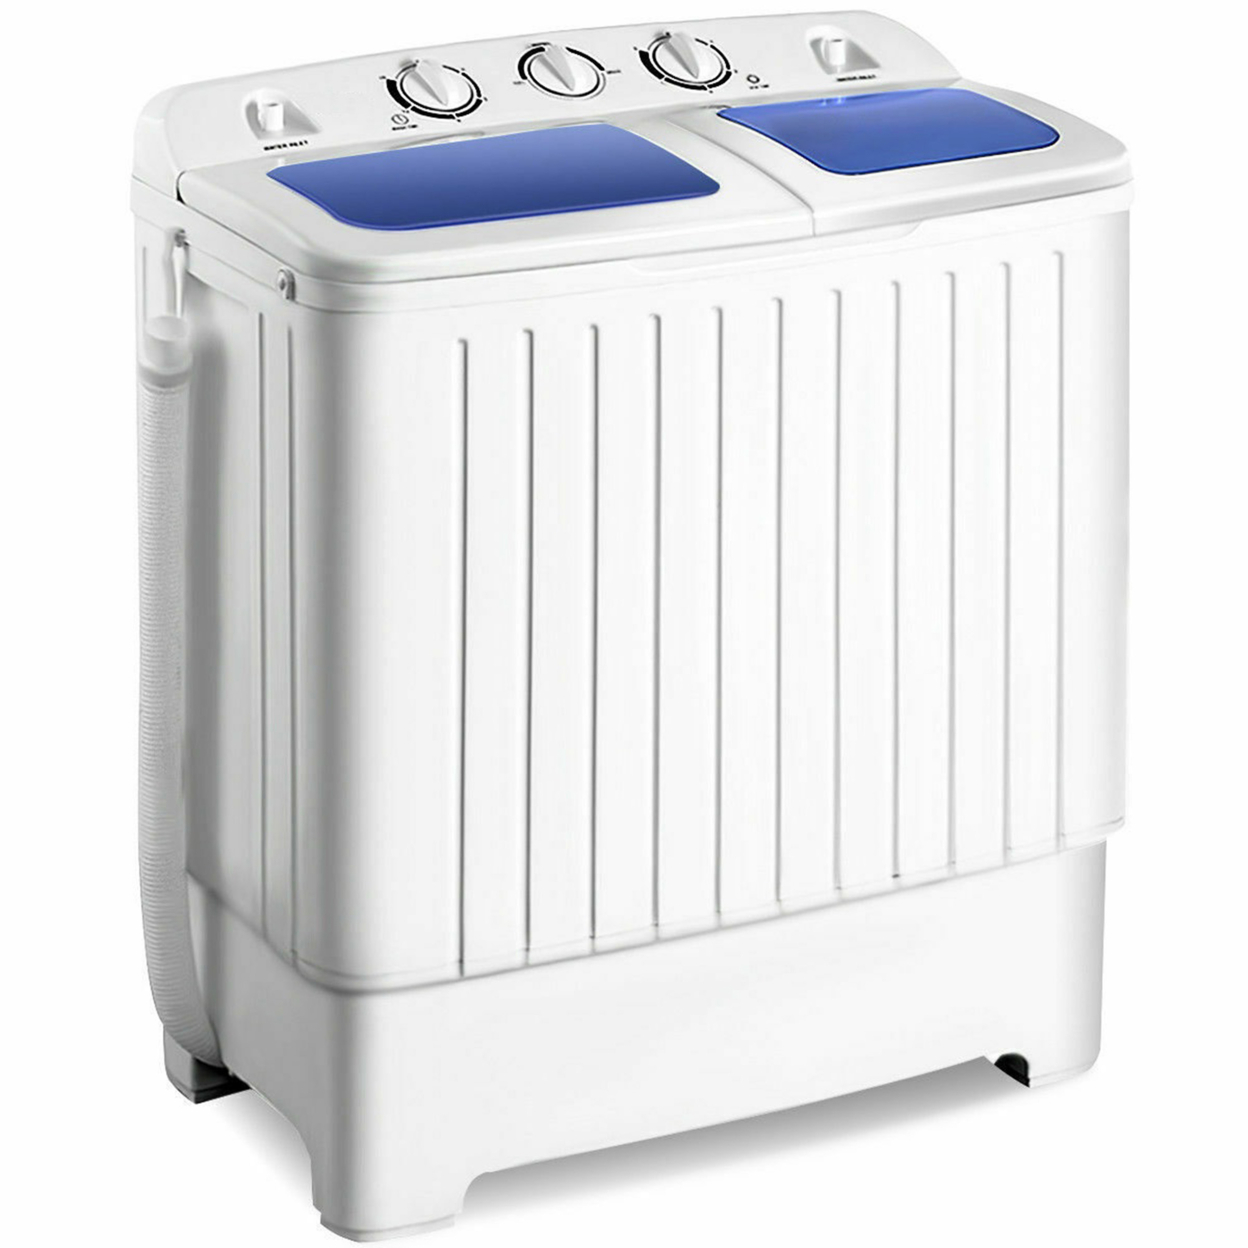 Compact Portable Washing Machine Twin Tub 20 Lbs Washer Spinner Home Dorm